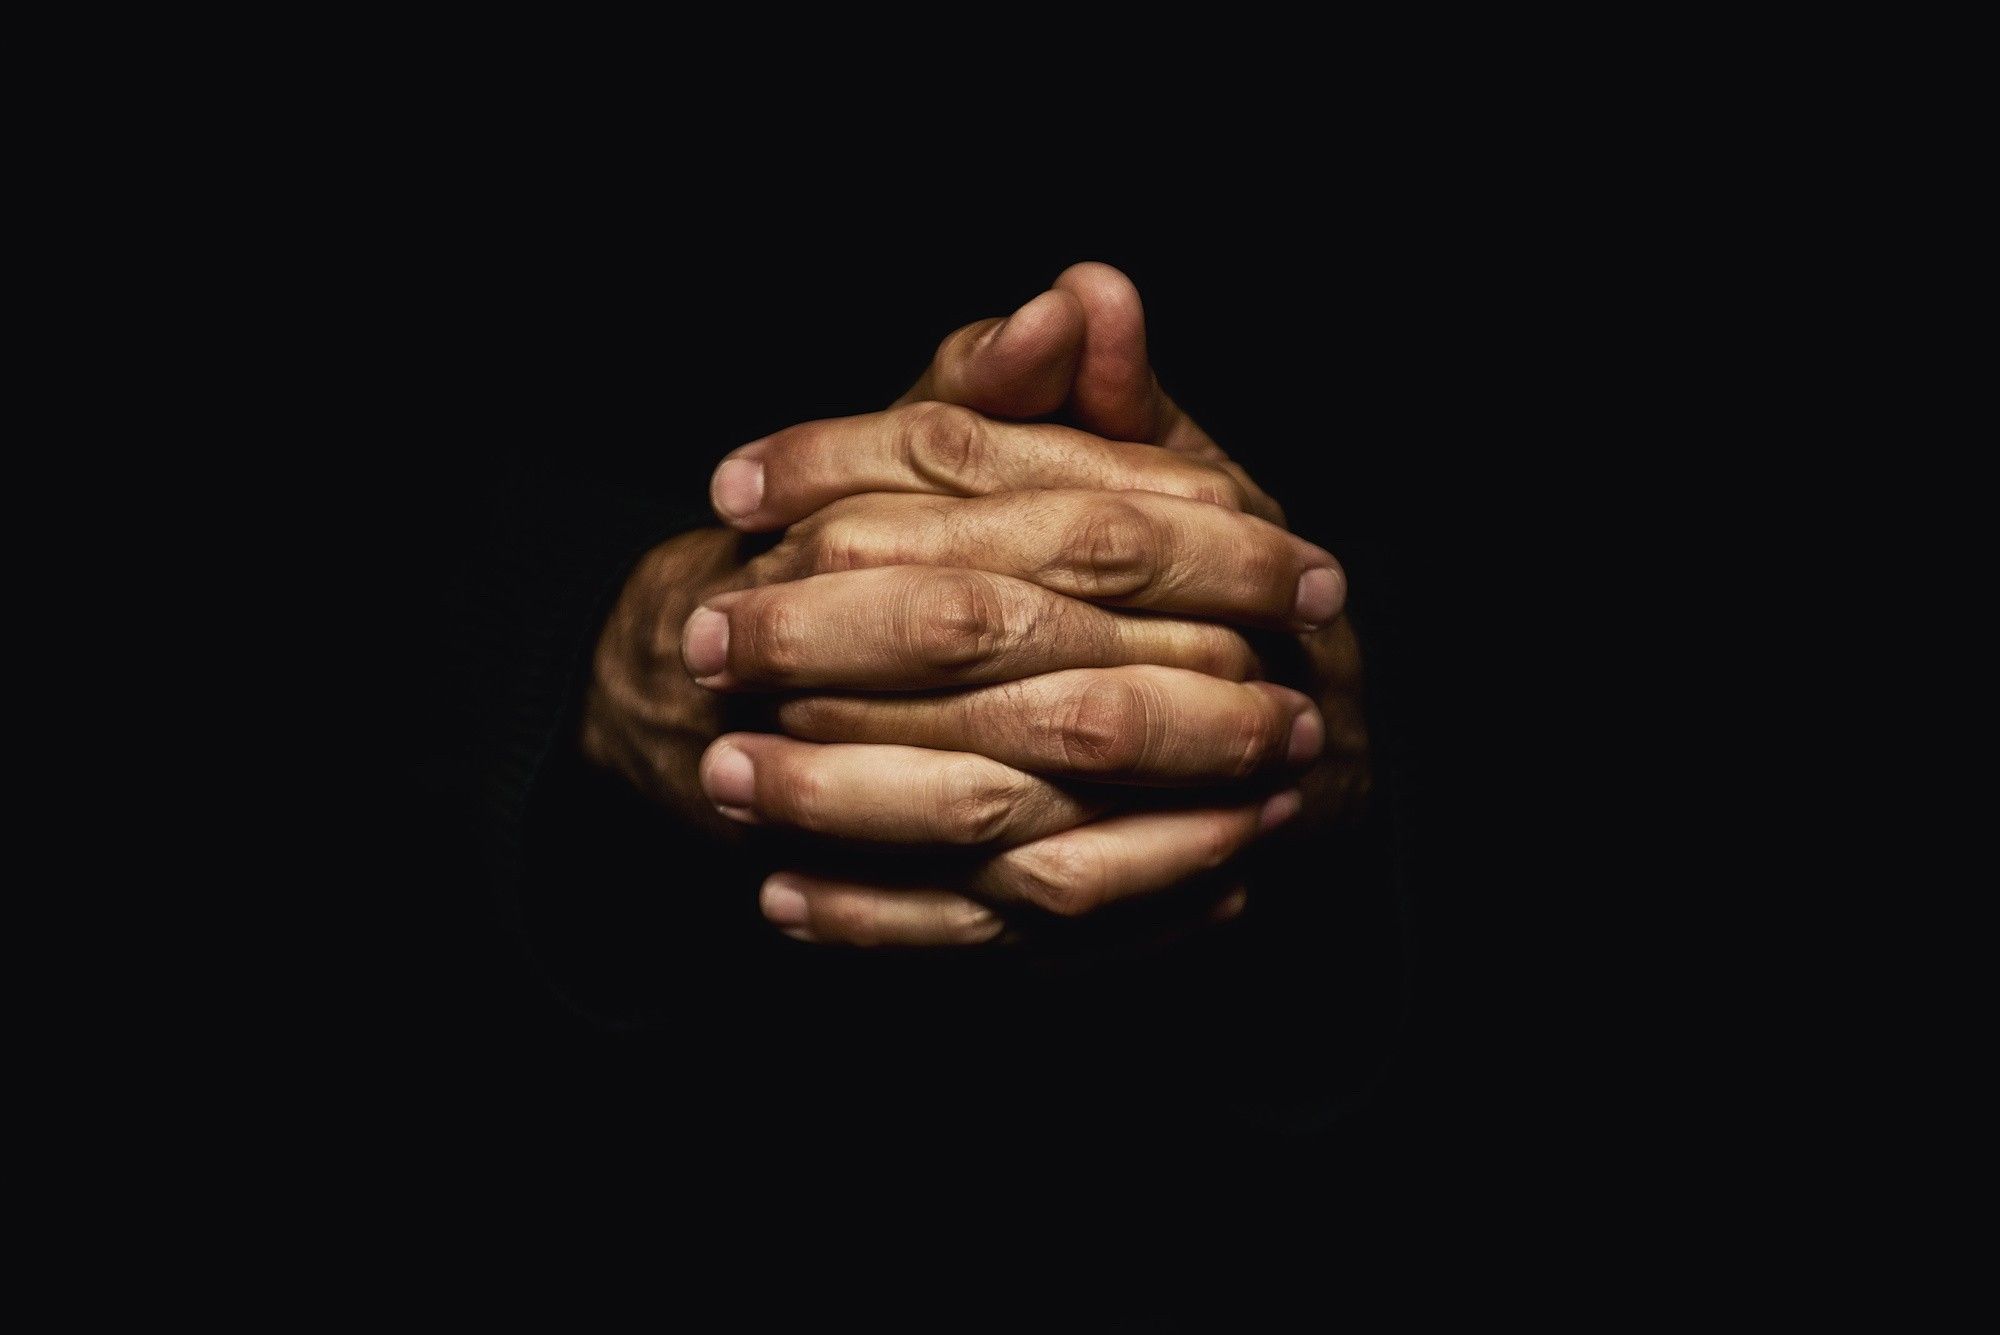 Praying Hands Wallpaper background picture